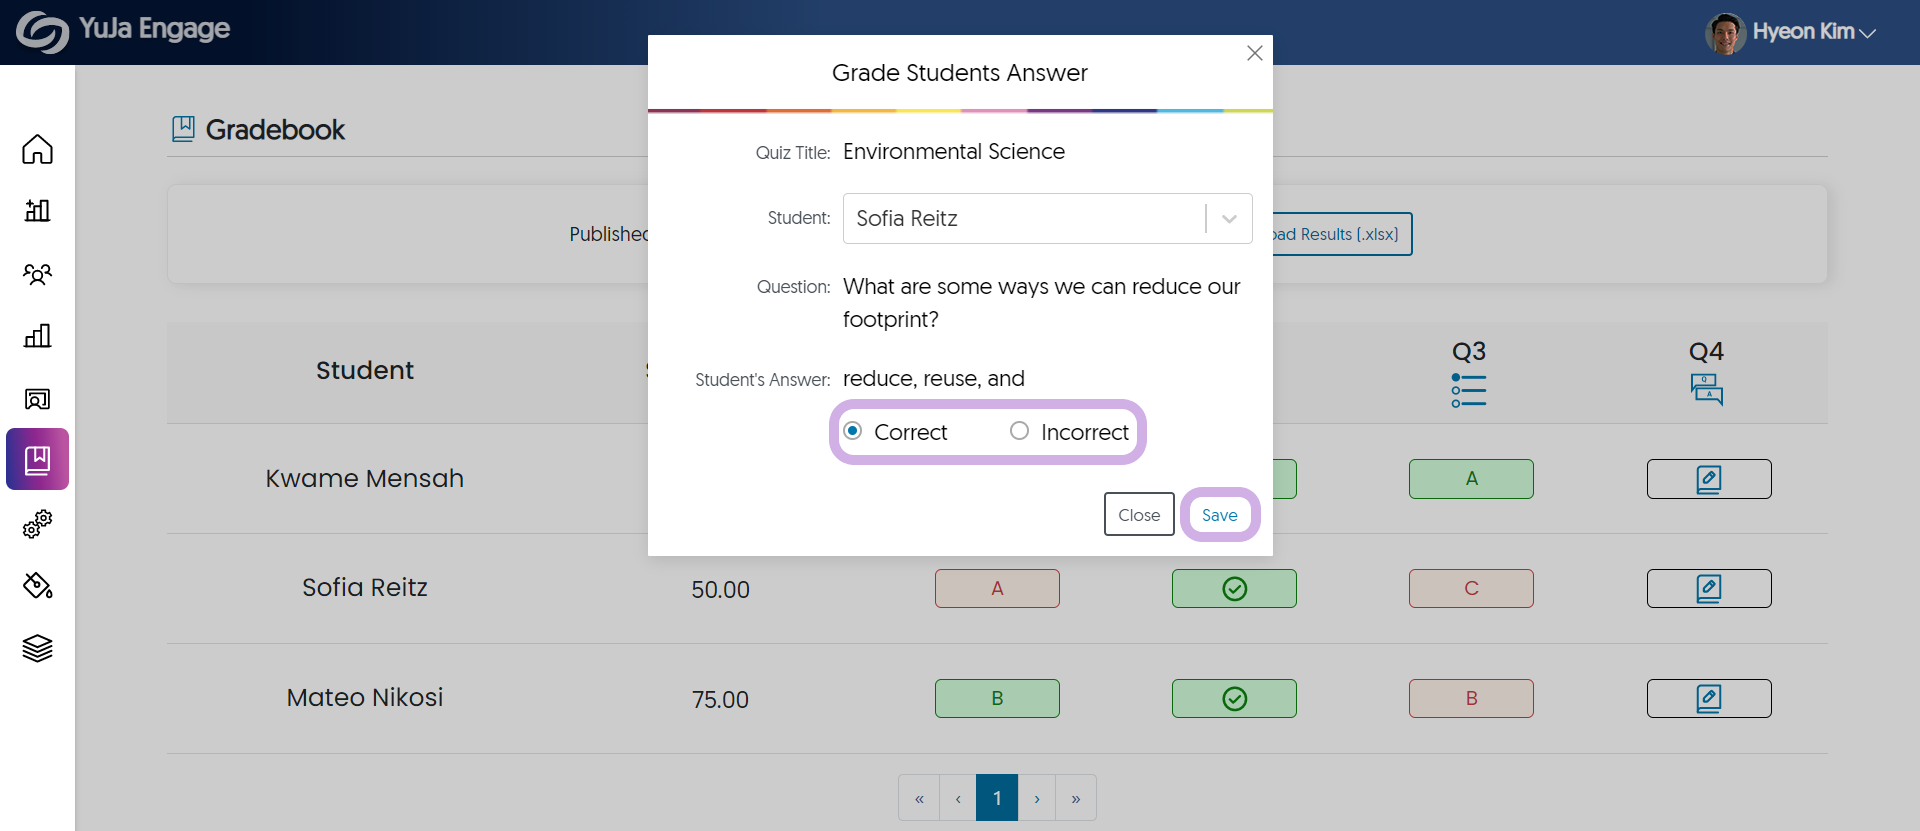 The Grade Students Answer module is shown.